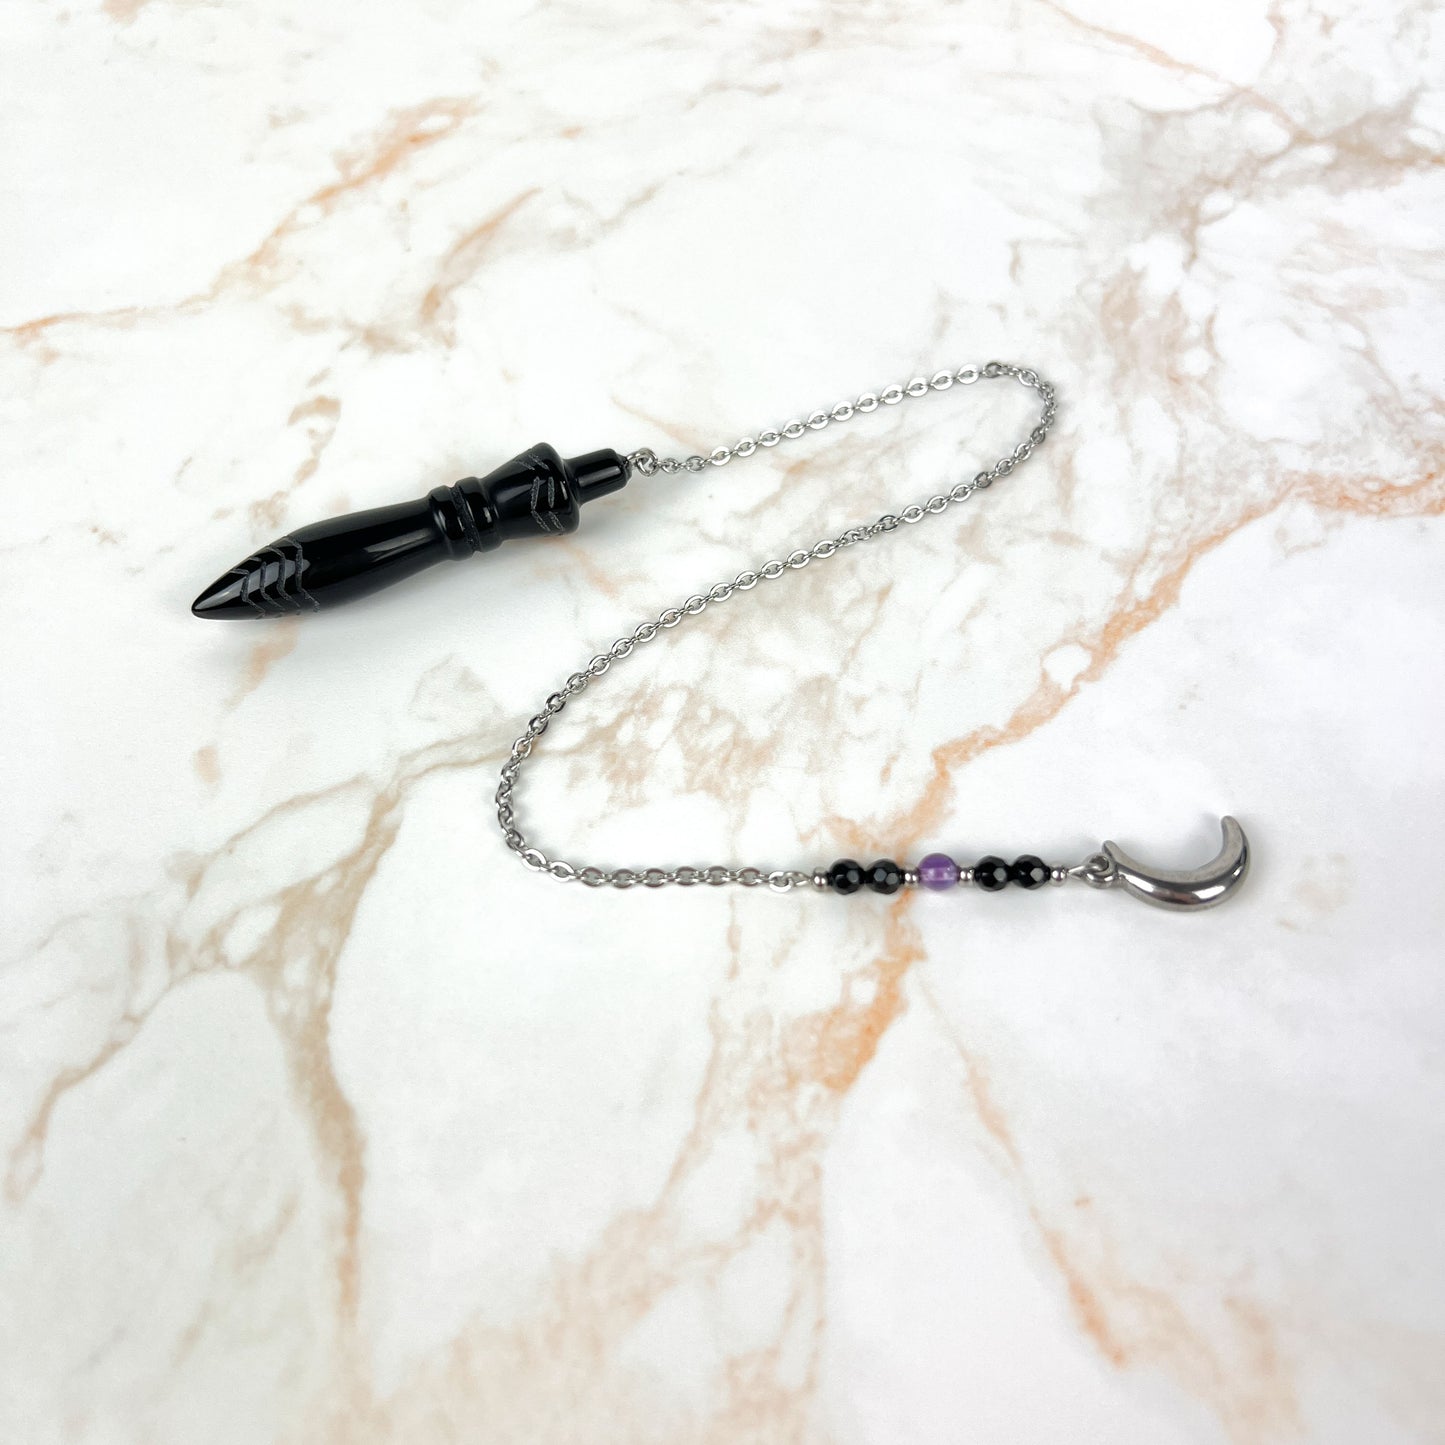 Engraved Egyptian Thot pendulum, obsidian, onyx, amethyst, stainless steel, Moon crescent charm